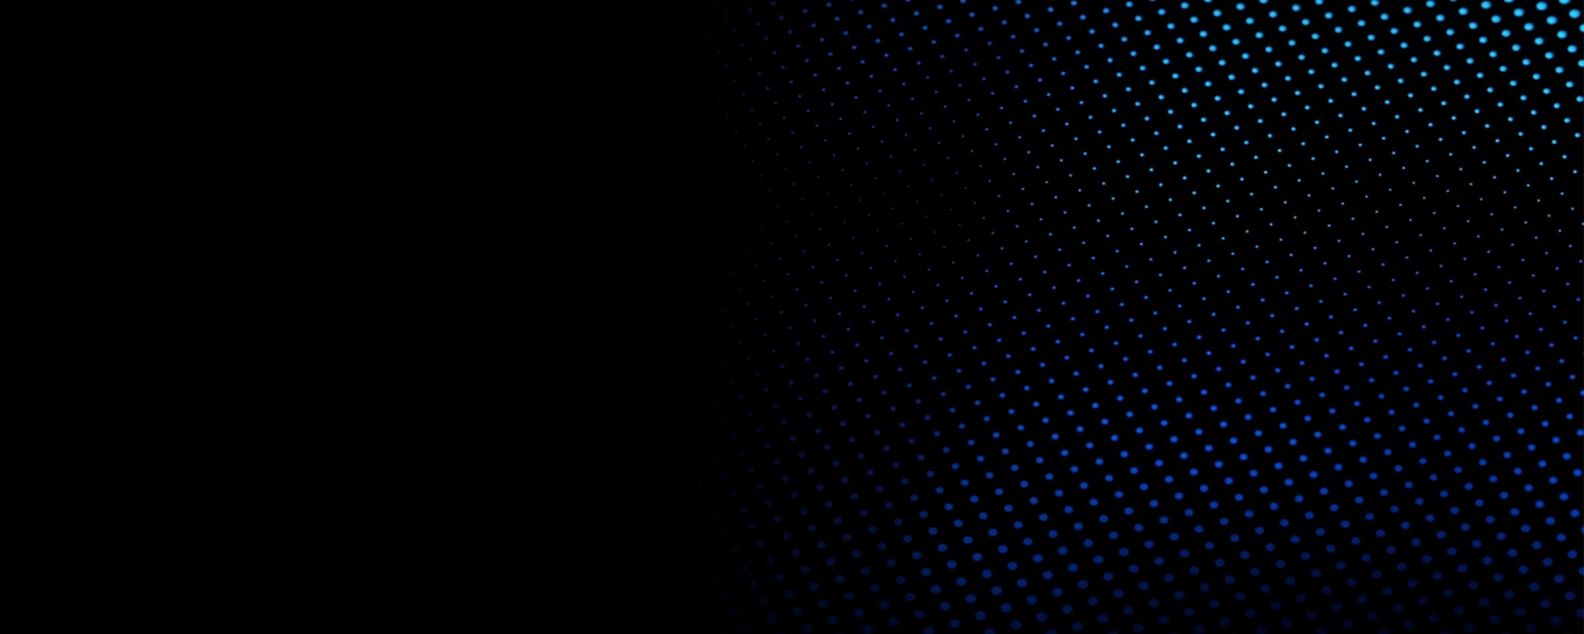 a grid pattern of dots on a dark background